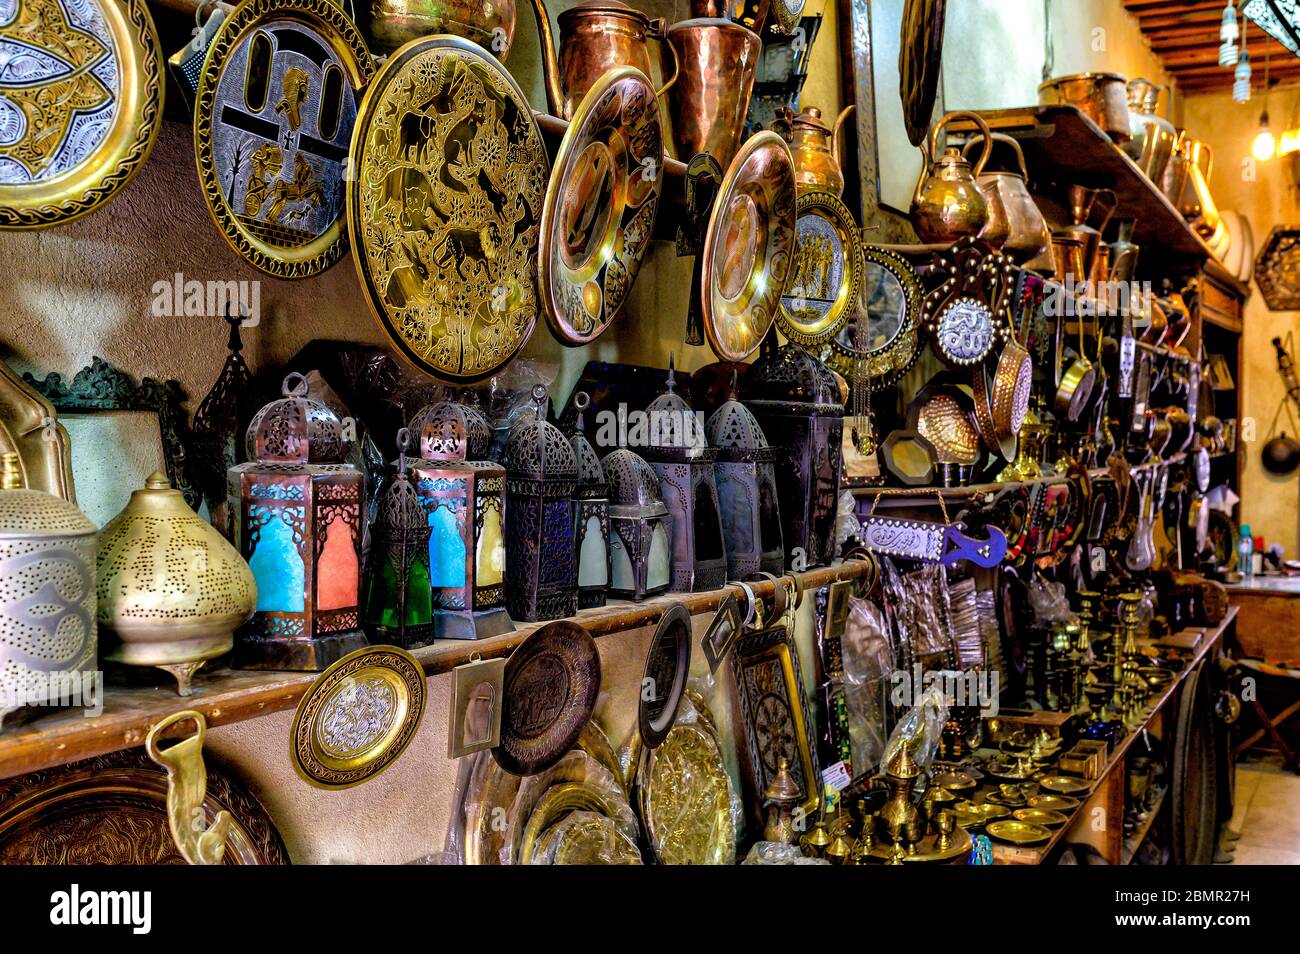 Antique brassware and decorative copper, bronze and iron plates, lanterns and pots on show at the Three Crazy Brothers store in Khan El Khalili market Stock Photo